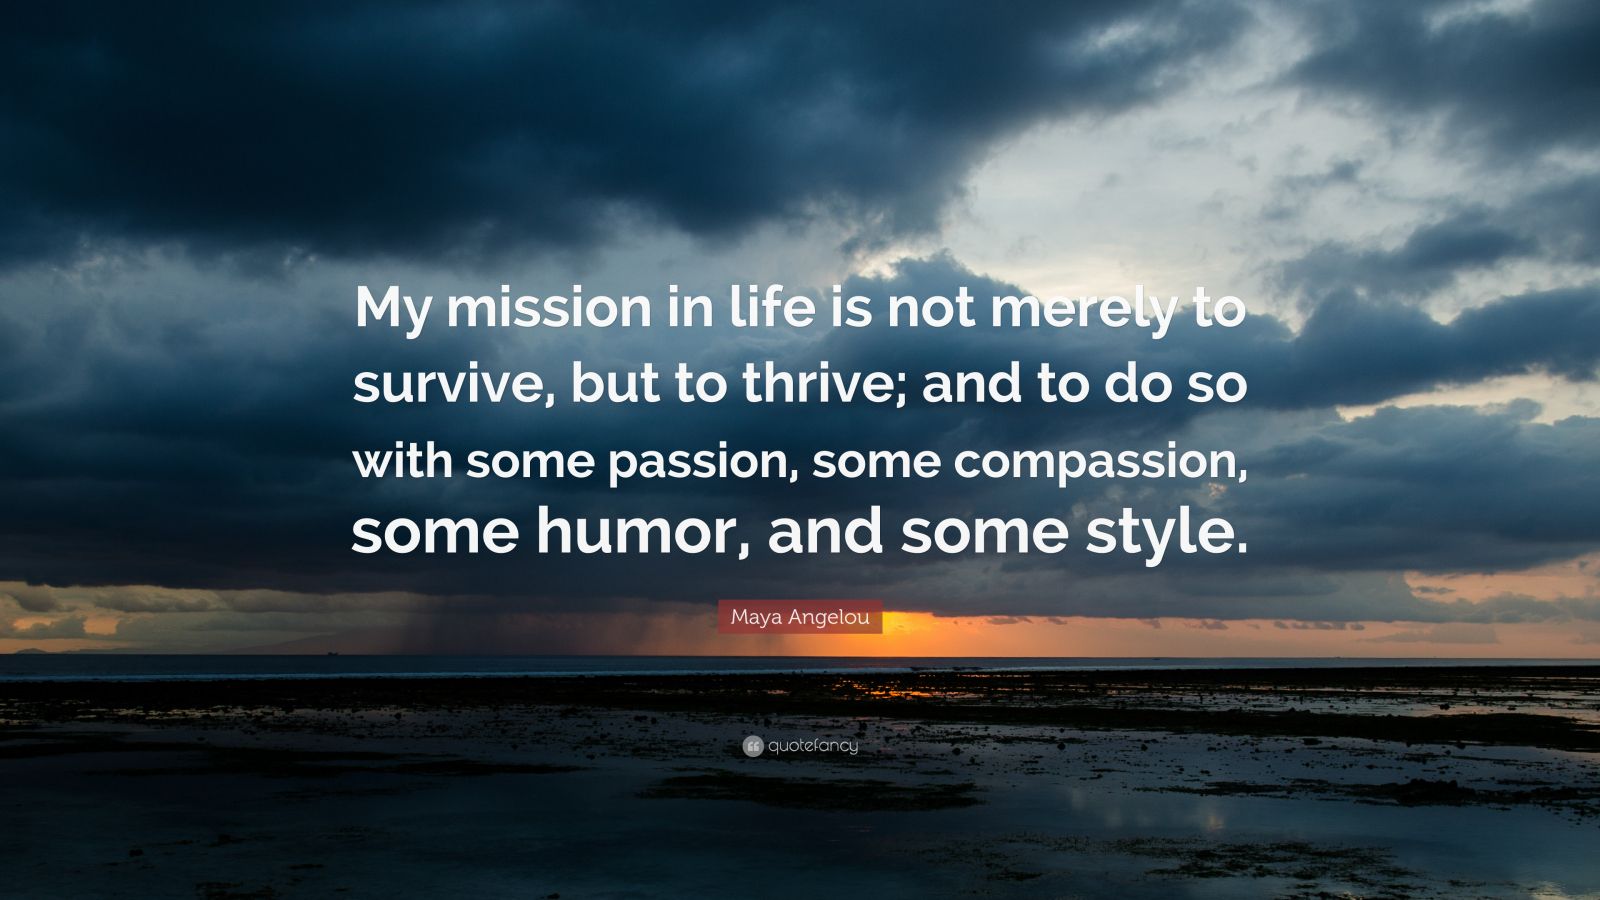 Maya Angelou Quote: “My mission in life is not merely to survive, but